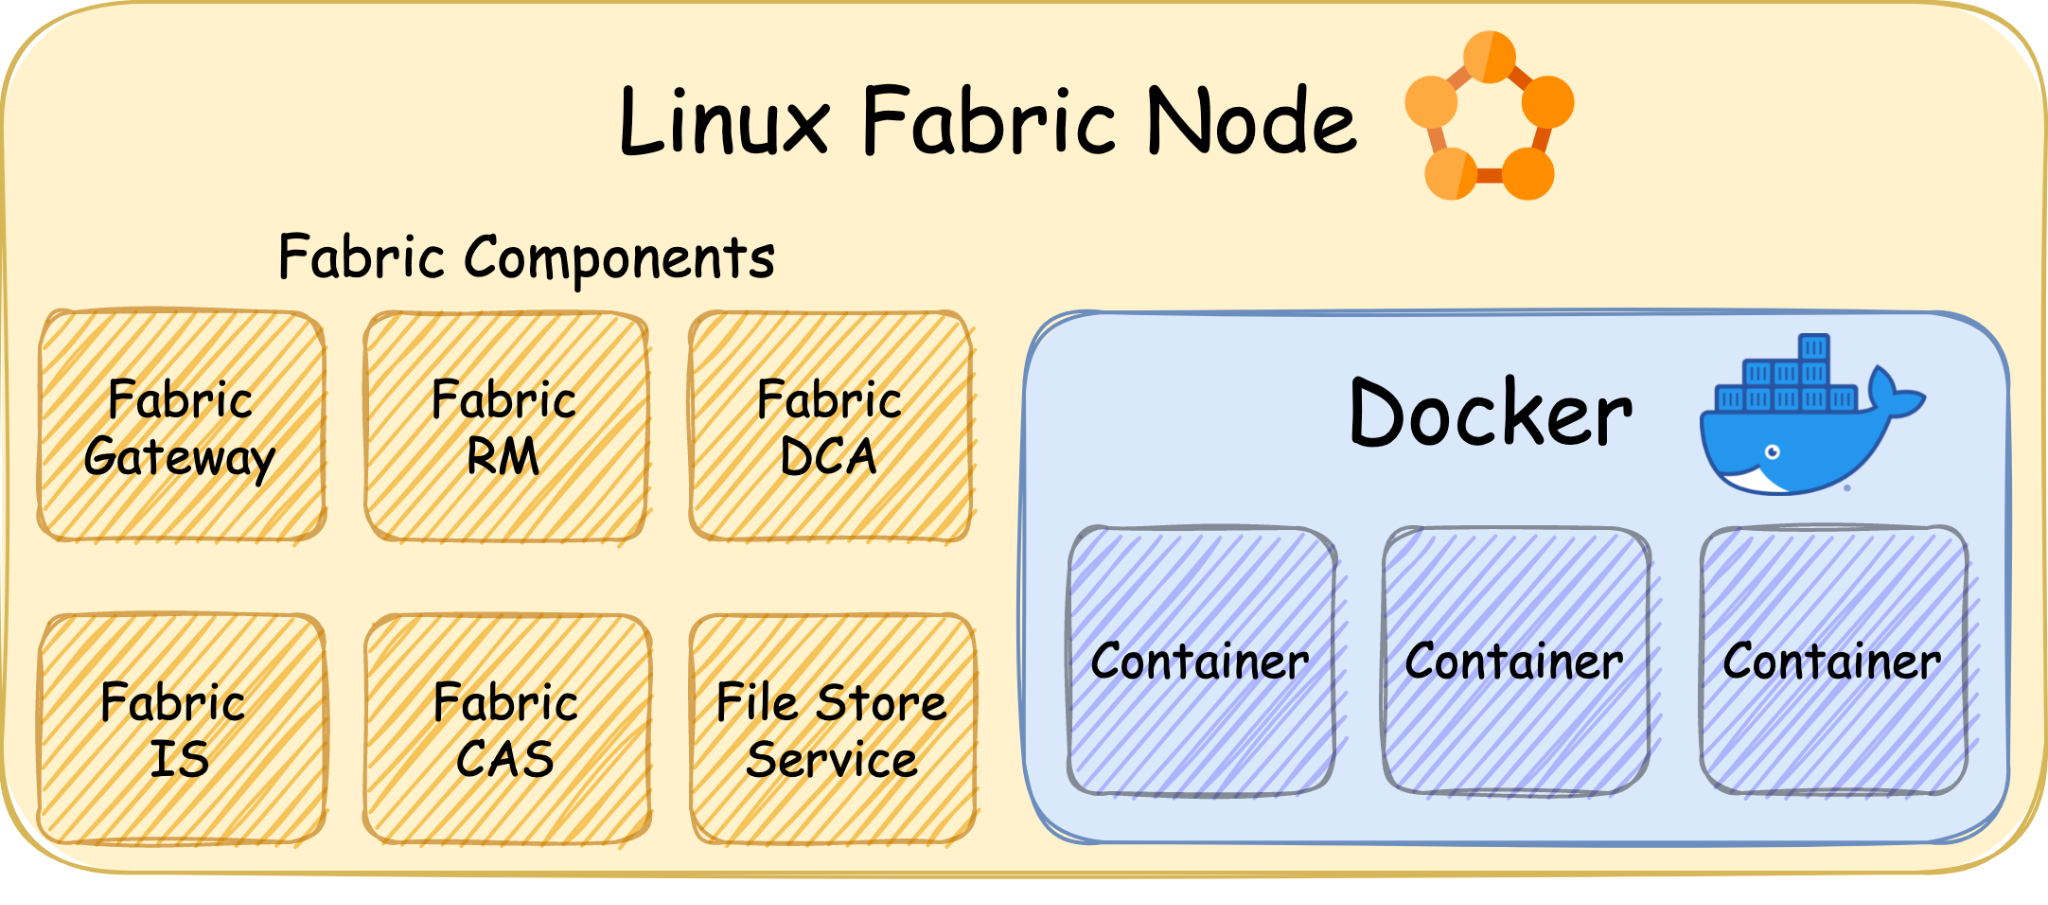 Linux Fabric Node: Fabric Components - Fabric Gateway, Fabric RM, Fabric DCA, Fabric IS, Fabric CAS, File Store Service. These are shown in the diagram beside several Docker containers. 